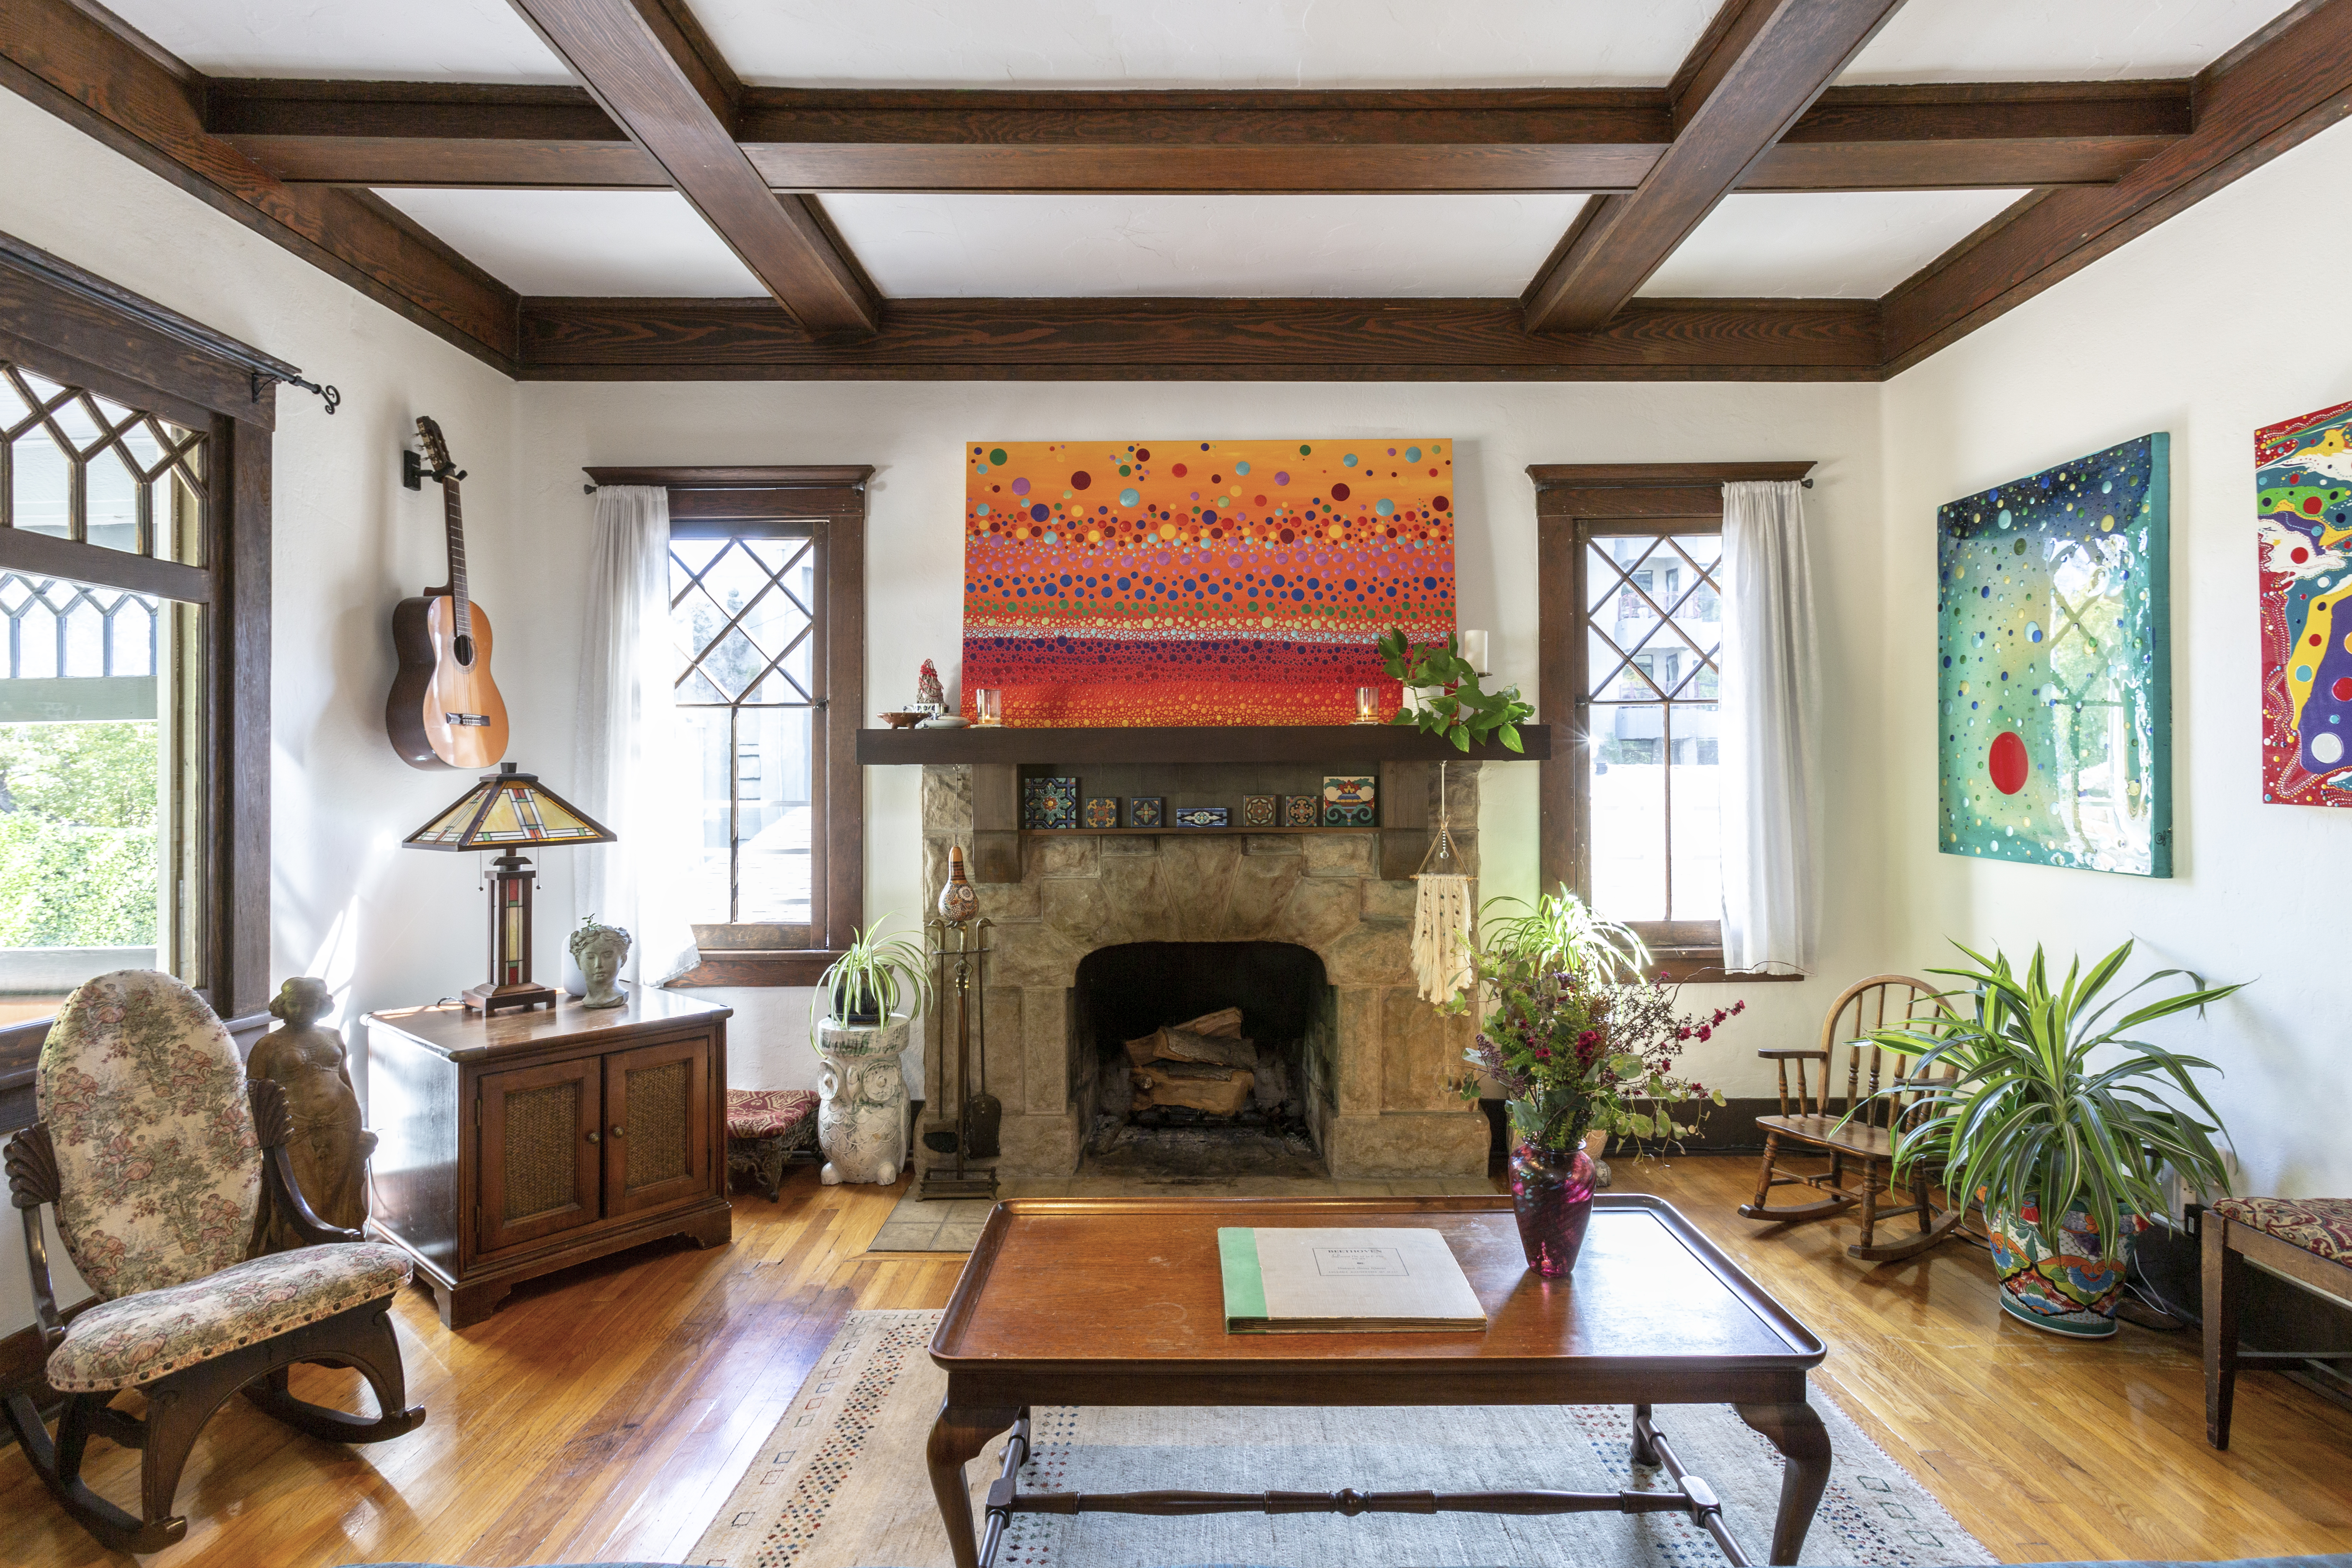 Room features stone fireplace, wooden floors, and art on walls.